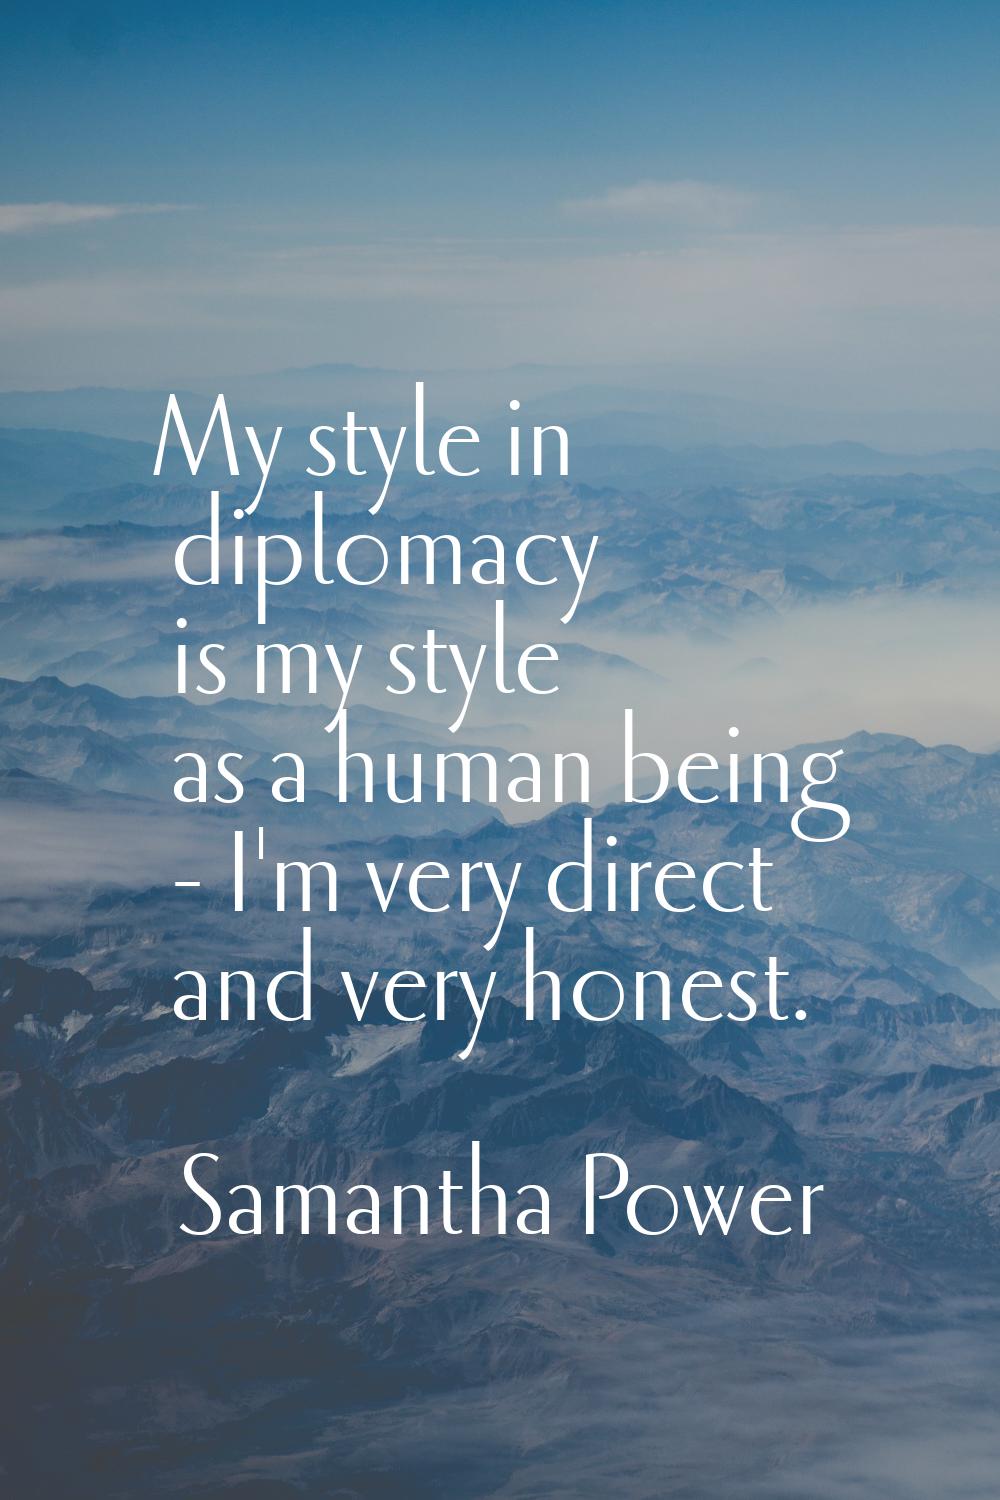 My style in diplomacy is my style as a human being - I'm very direct and very honest.